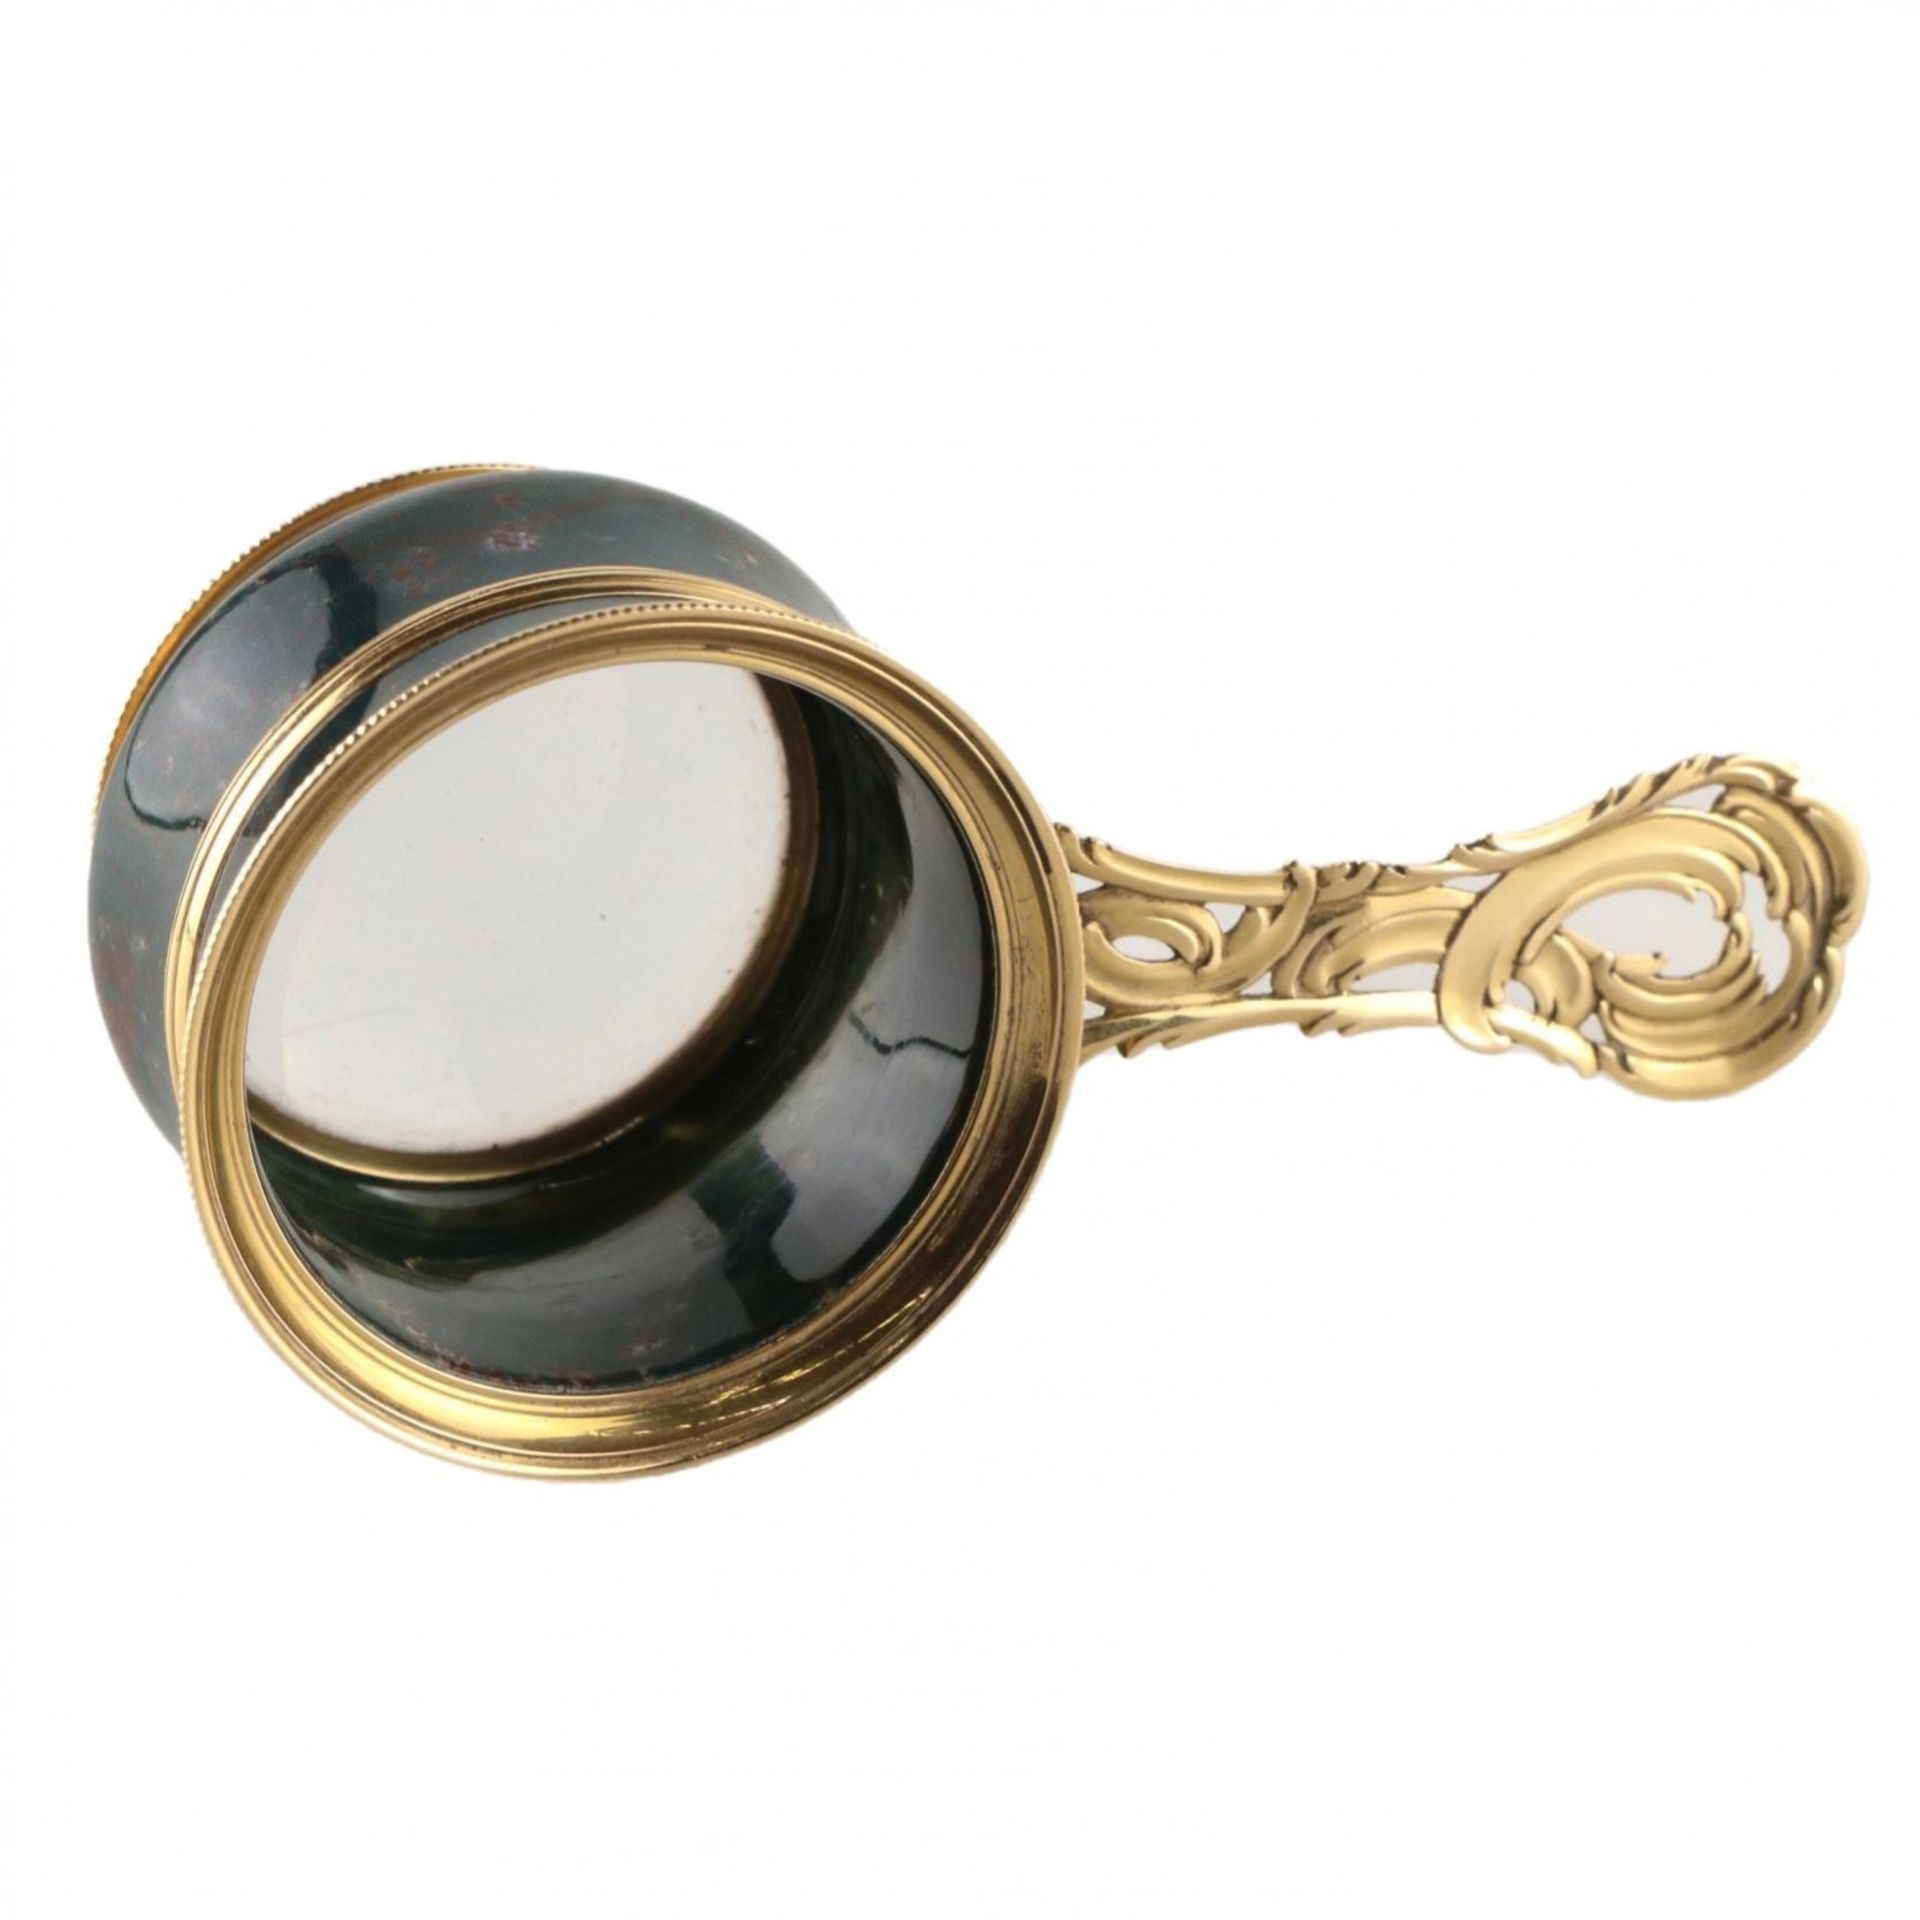 Magnifier in gold frame. - Image 7 of 10